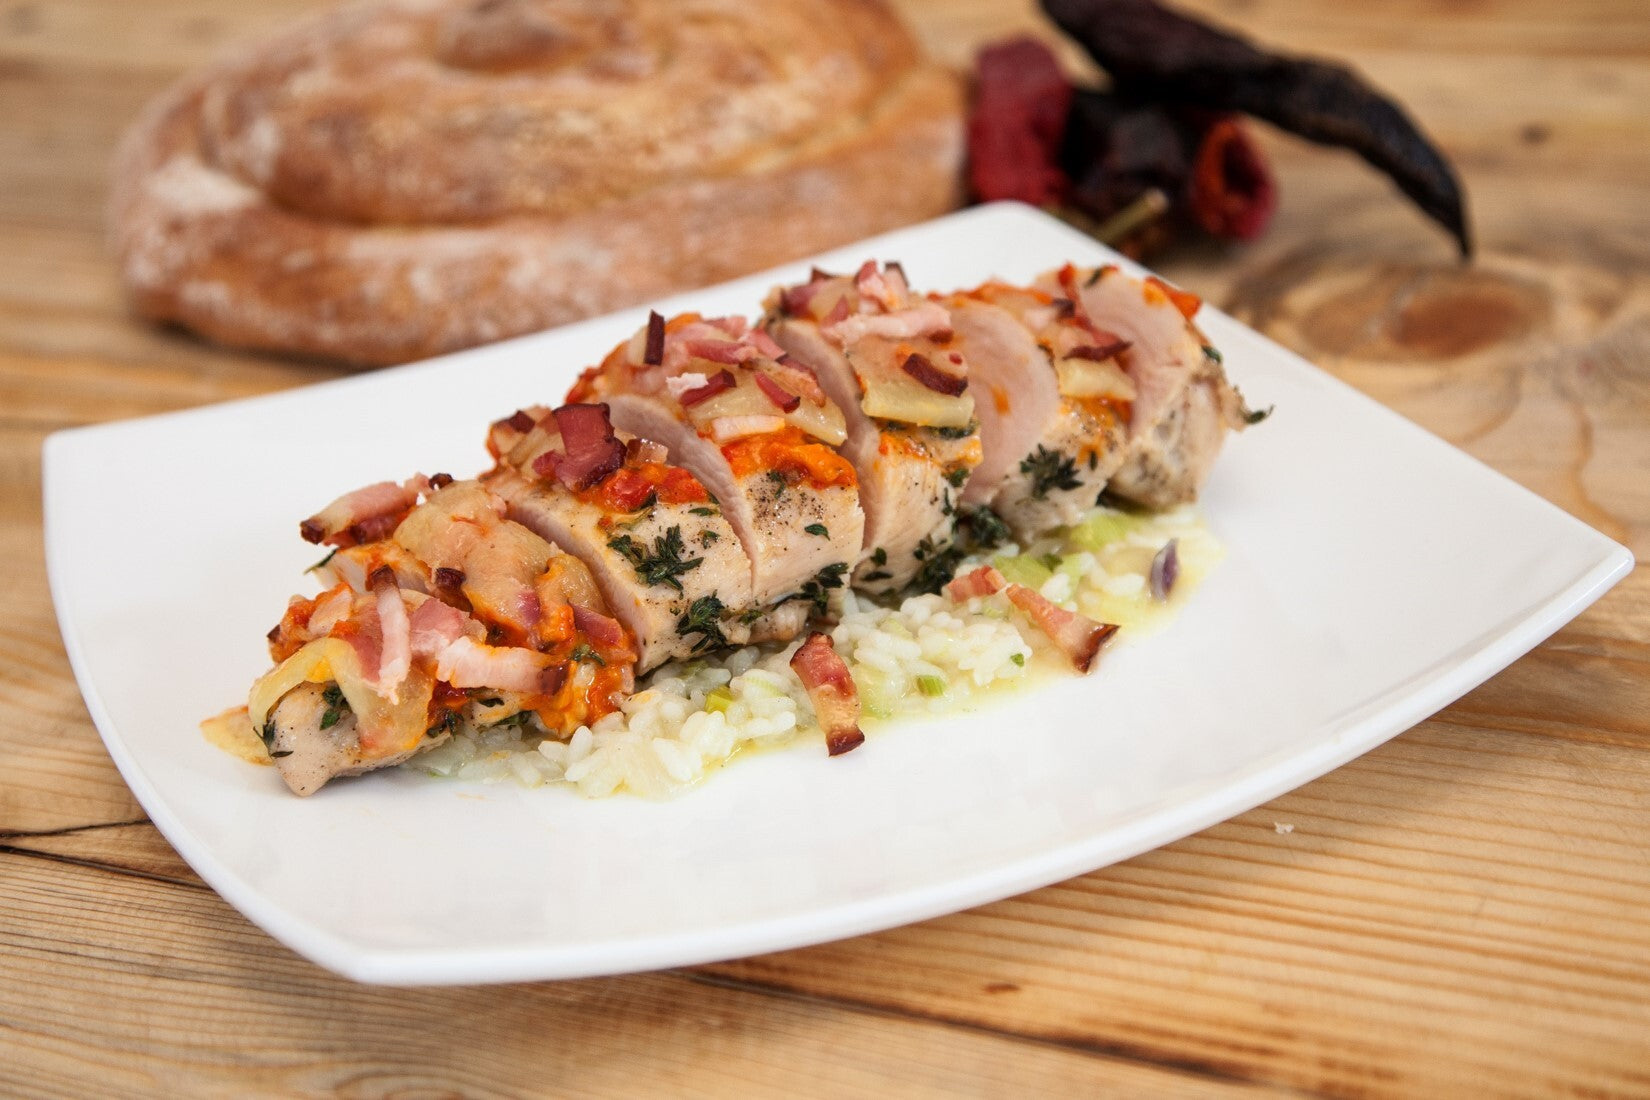 Pairing wines with Pelagonia's Griddled Chicken with Aivar and Cheesy Bacon Topping